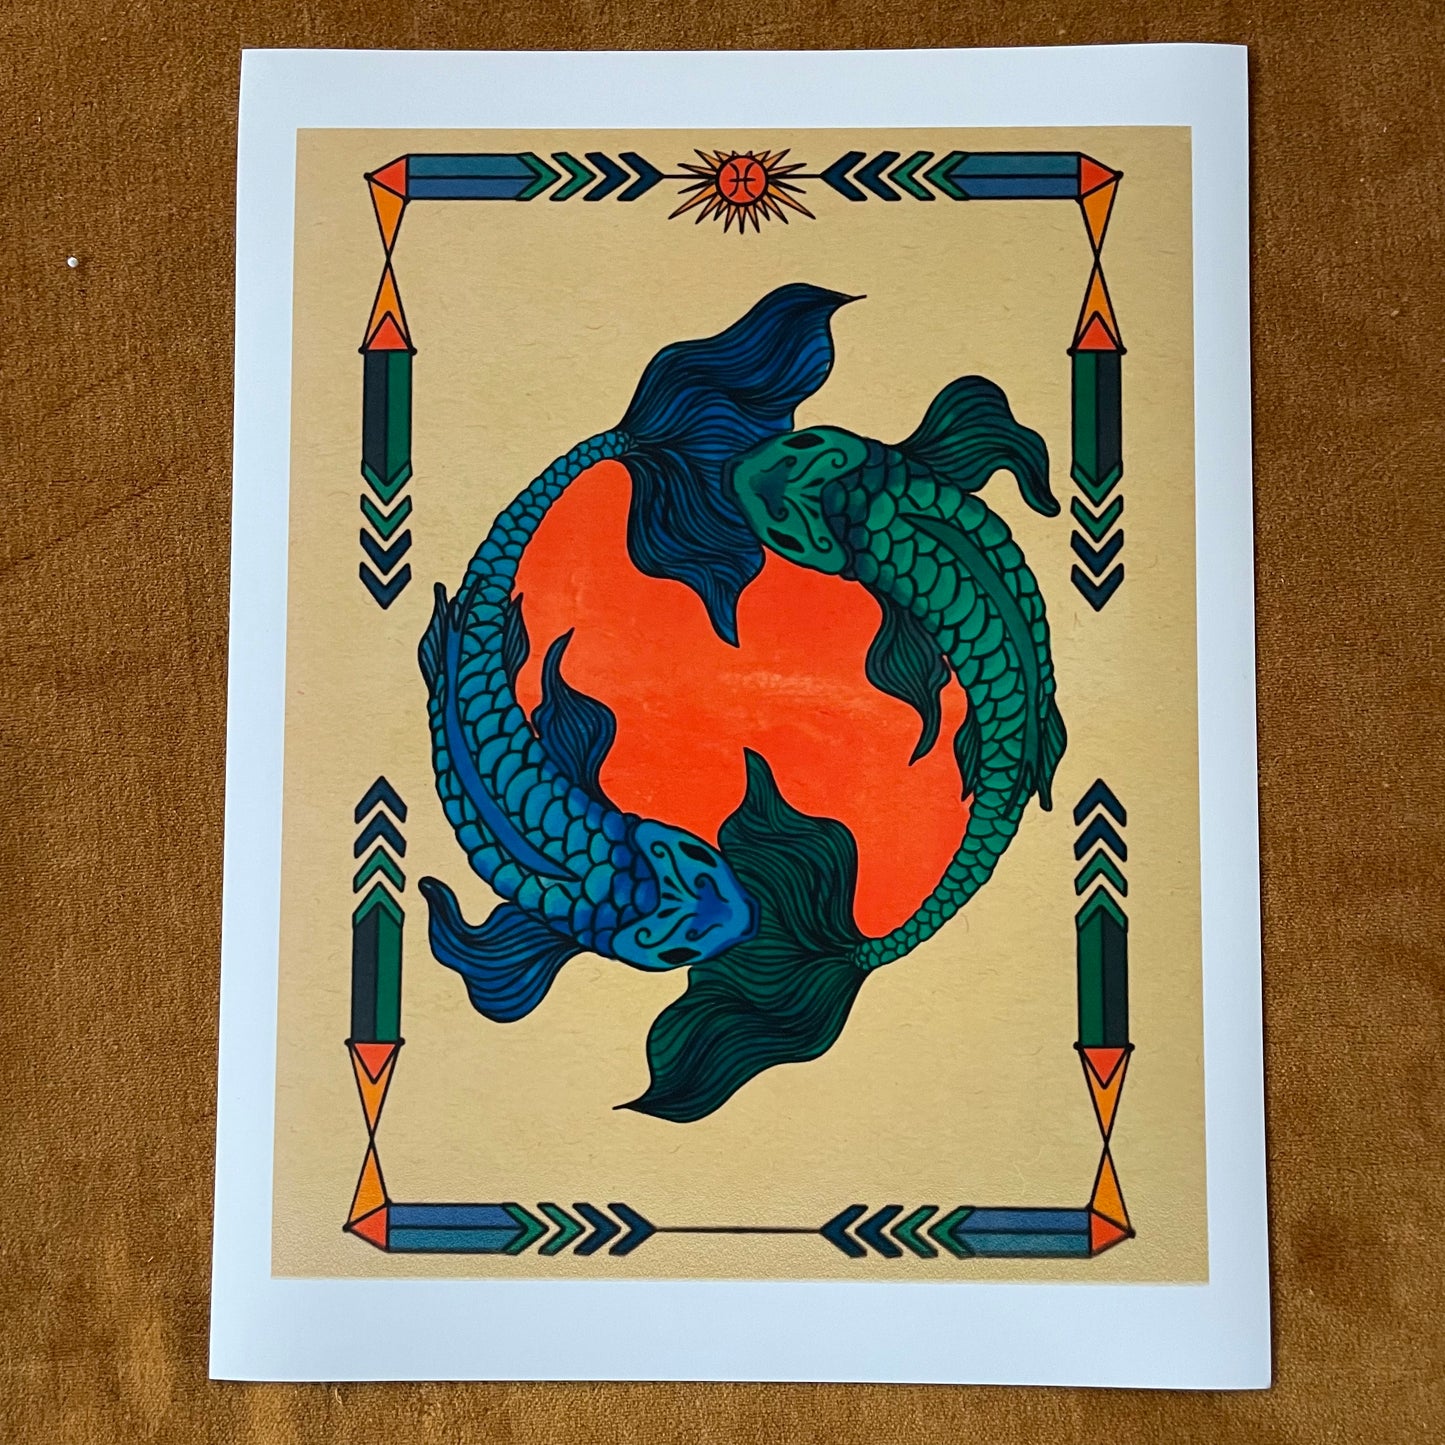 Pisces Horoscope Art Printed On Pearl Paper [See misprinted image]